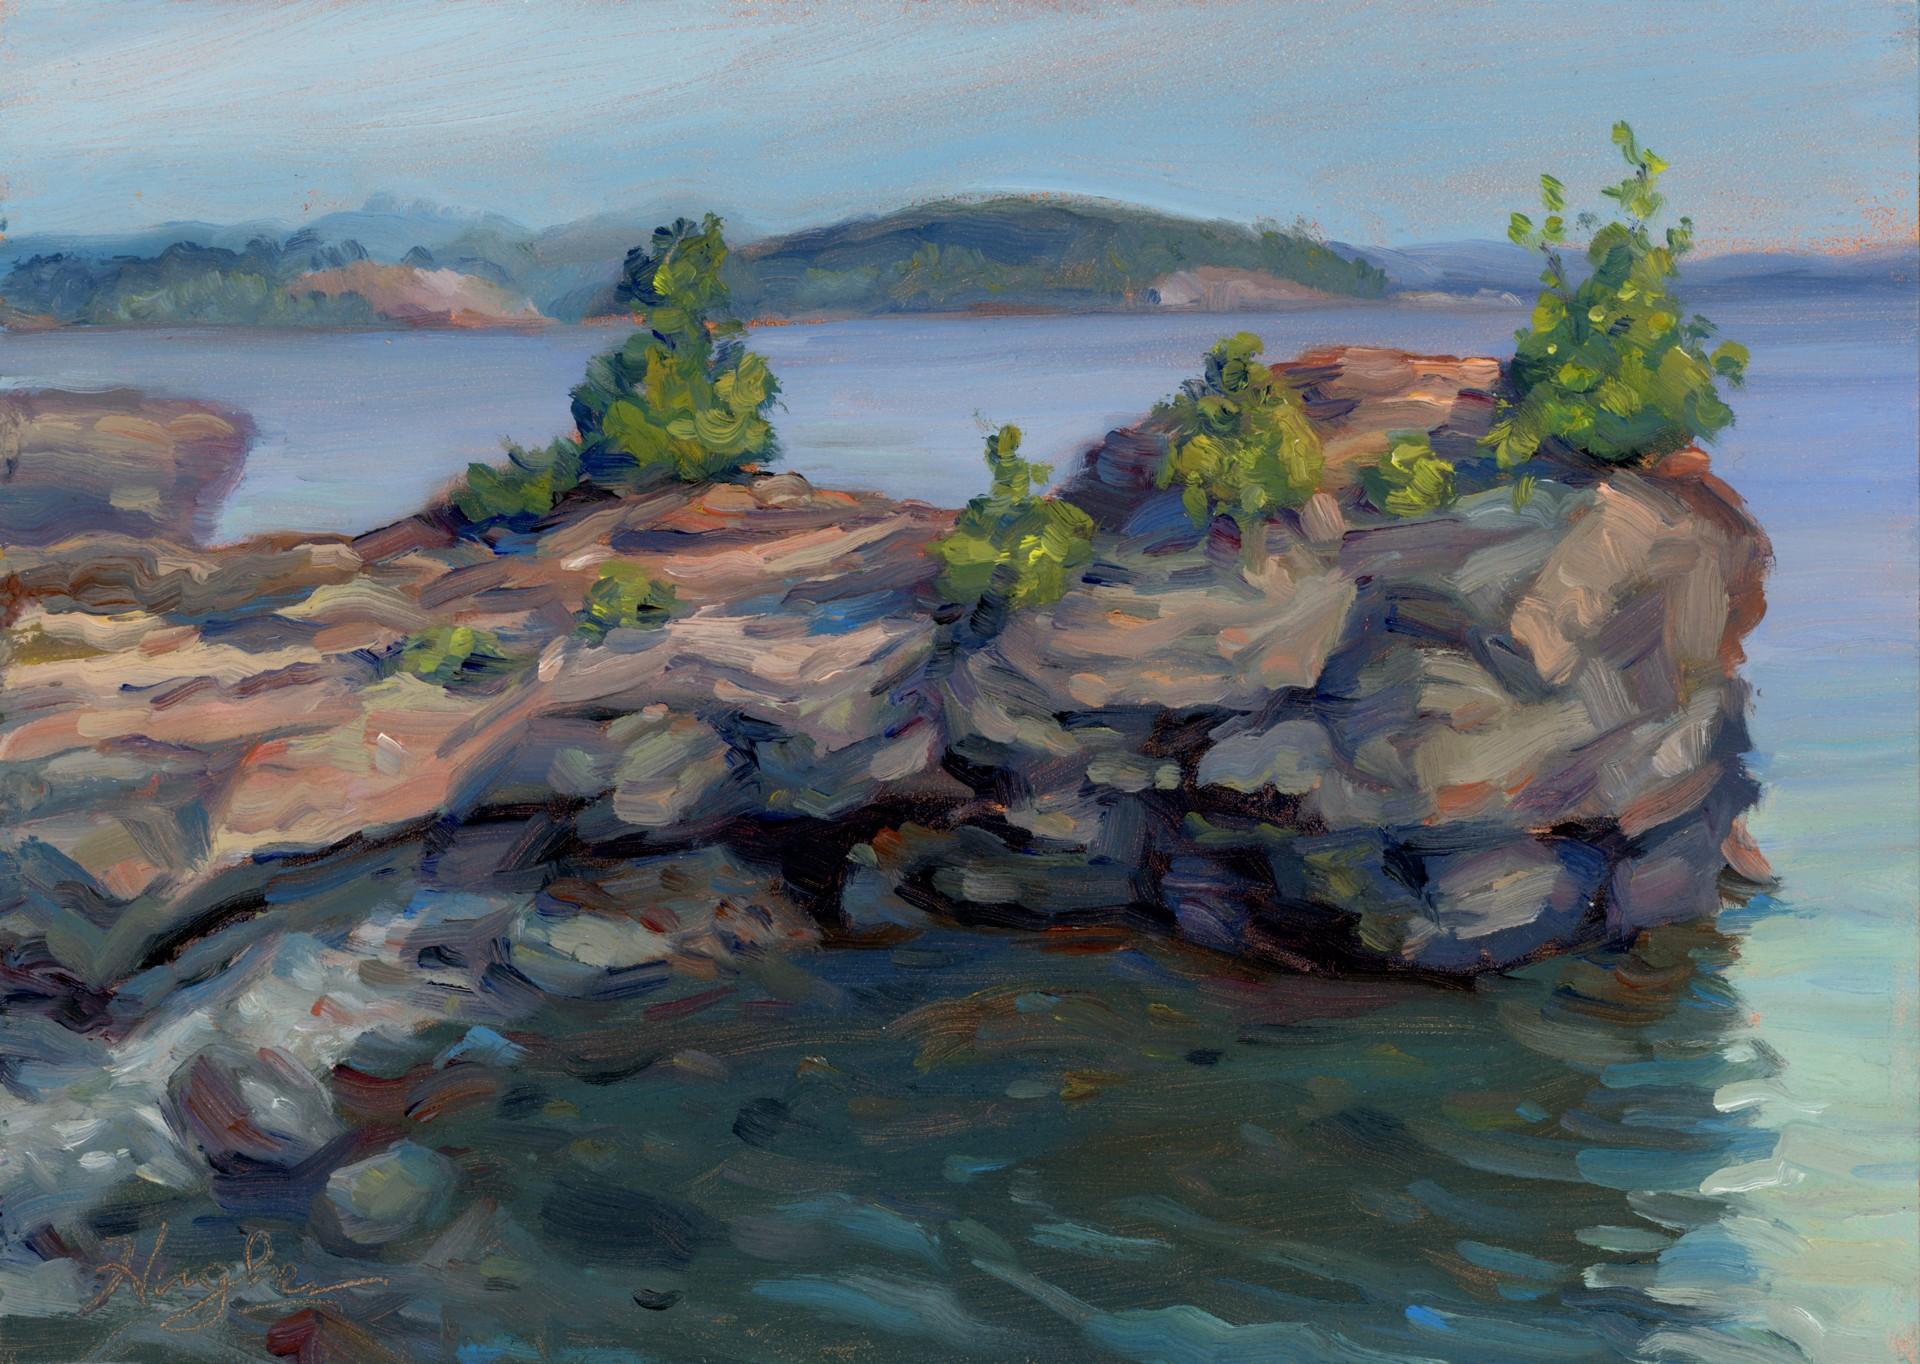 Primary Hughes Figurative Painting - Presque Isle (Day 25) August 16